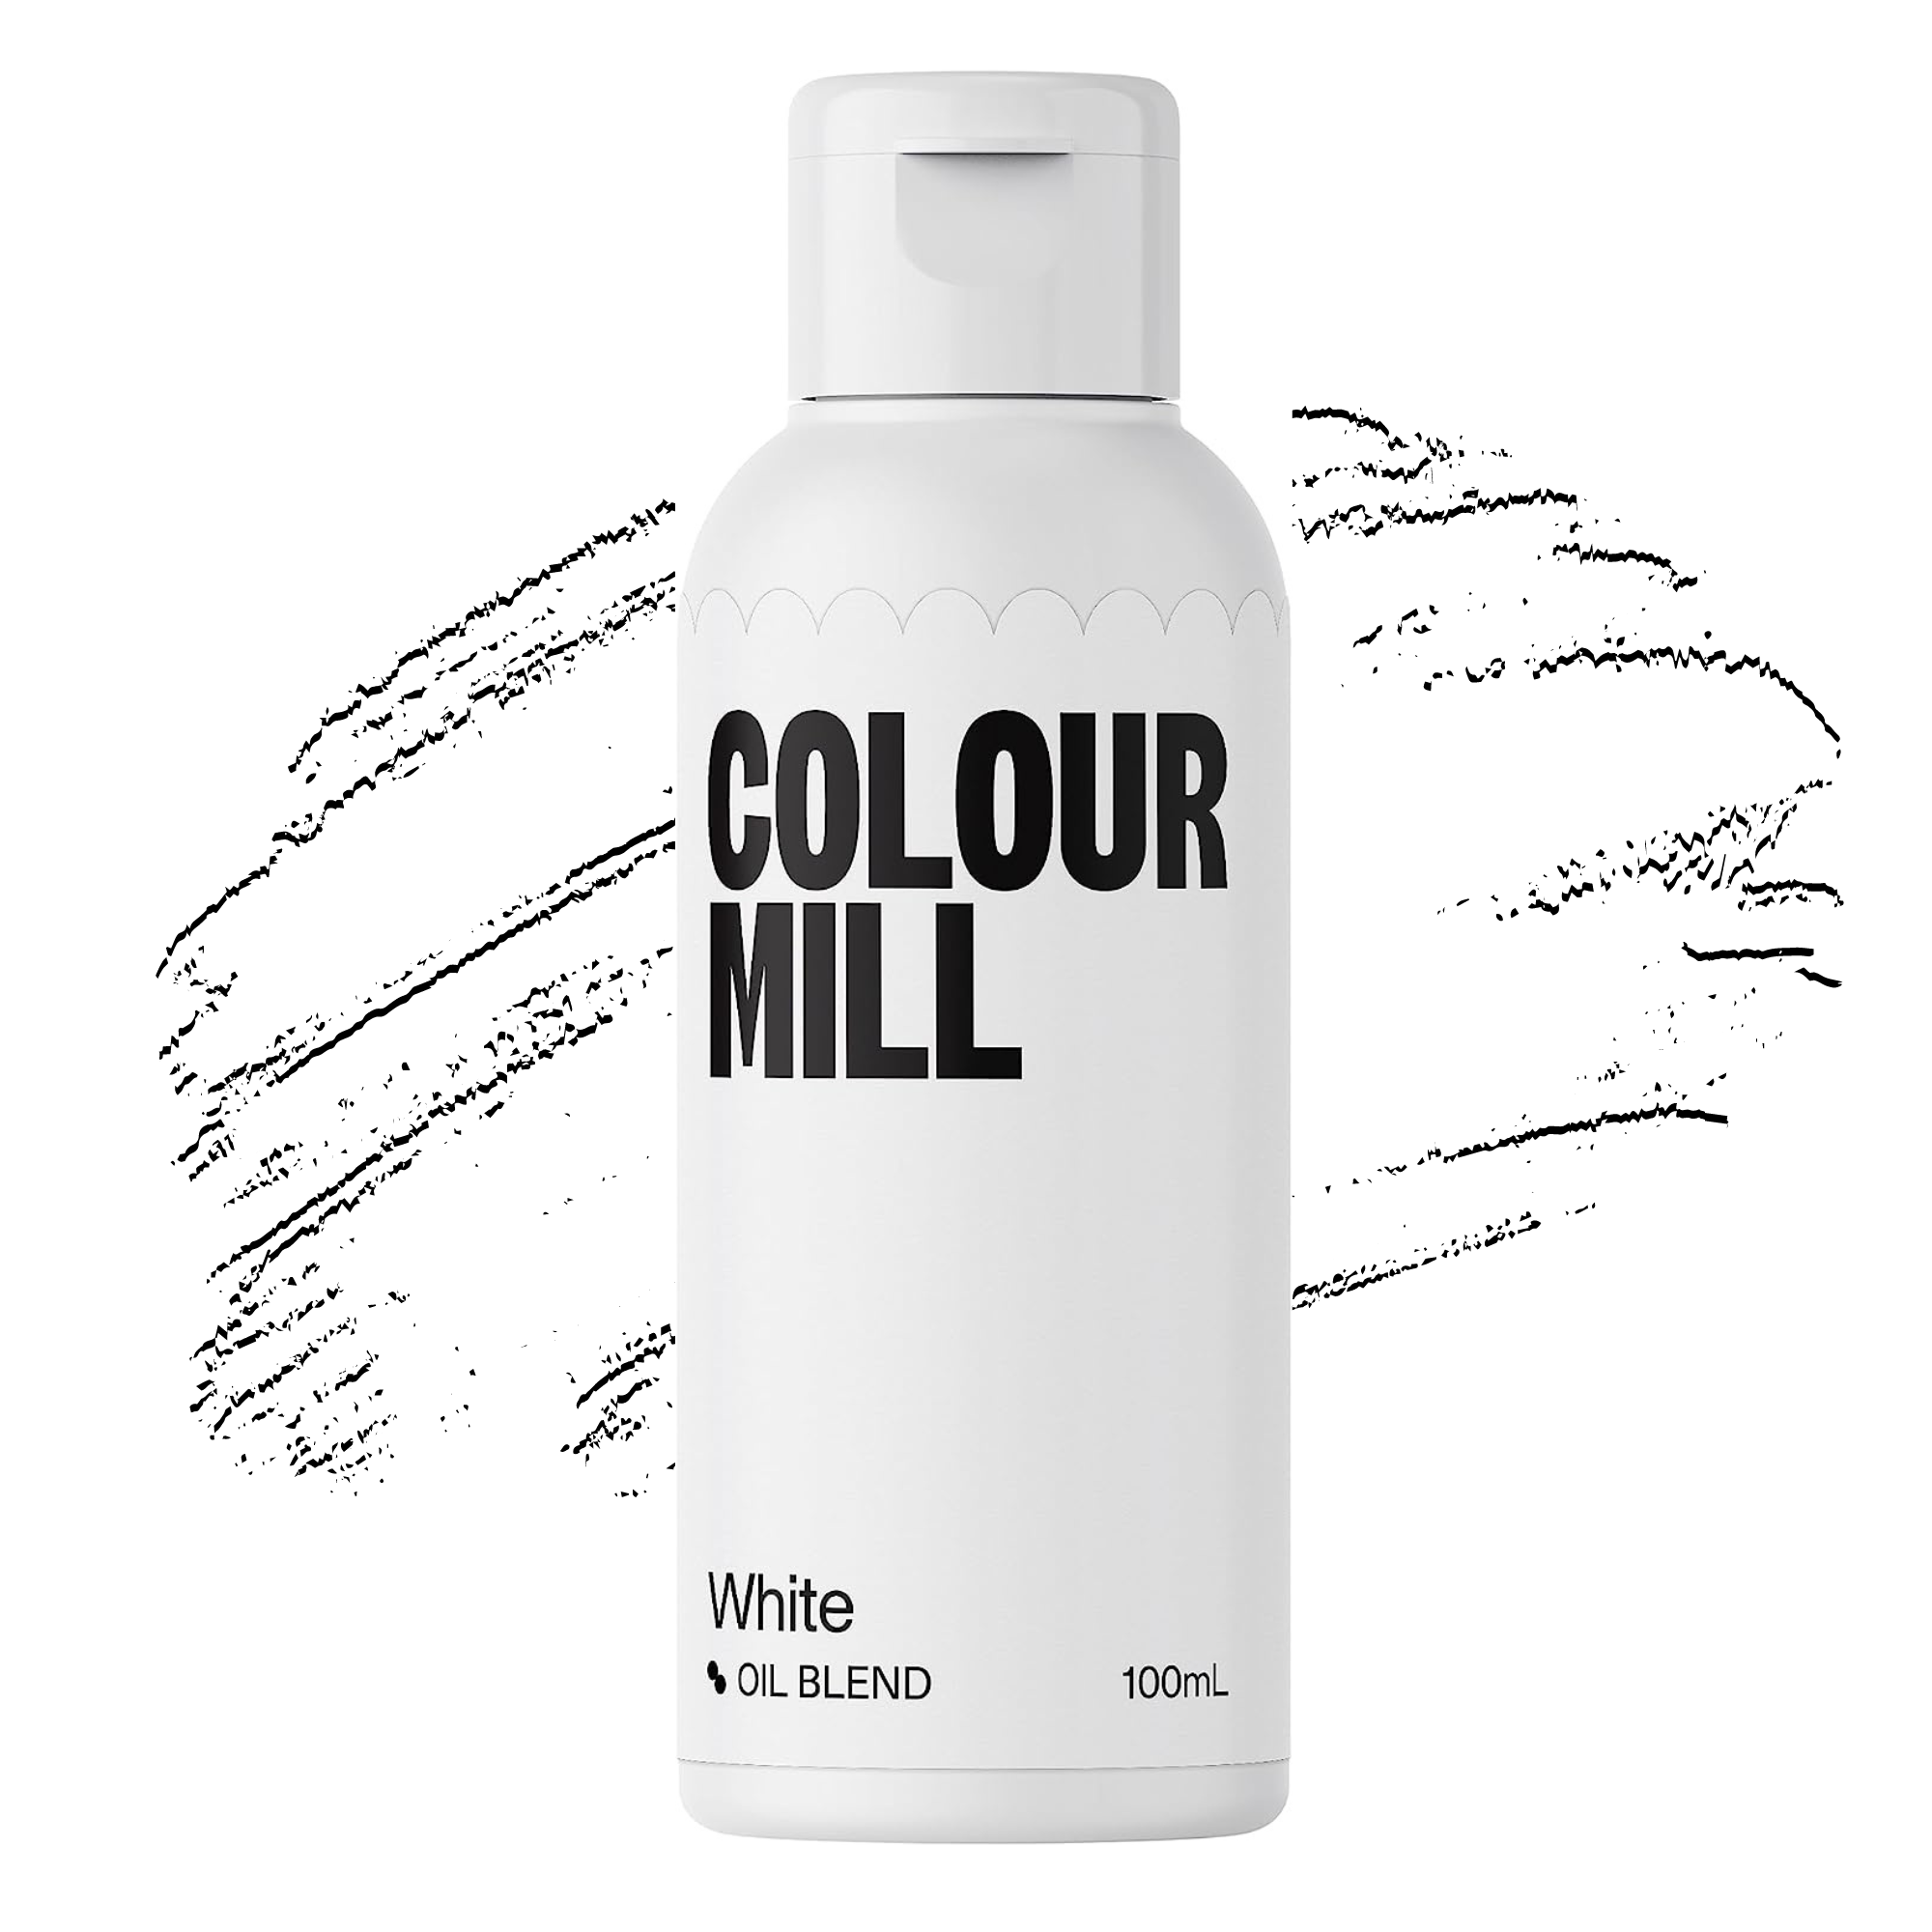 Colour Mill - Oil Blend Coloring - All 40 Colors Included - 100 mL